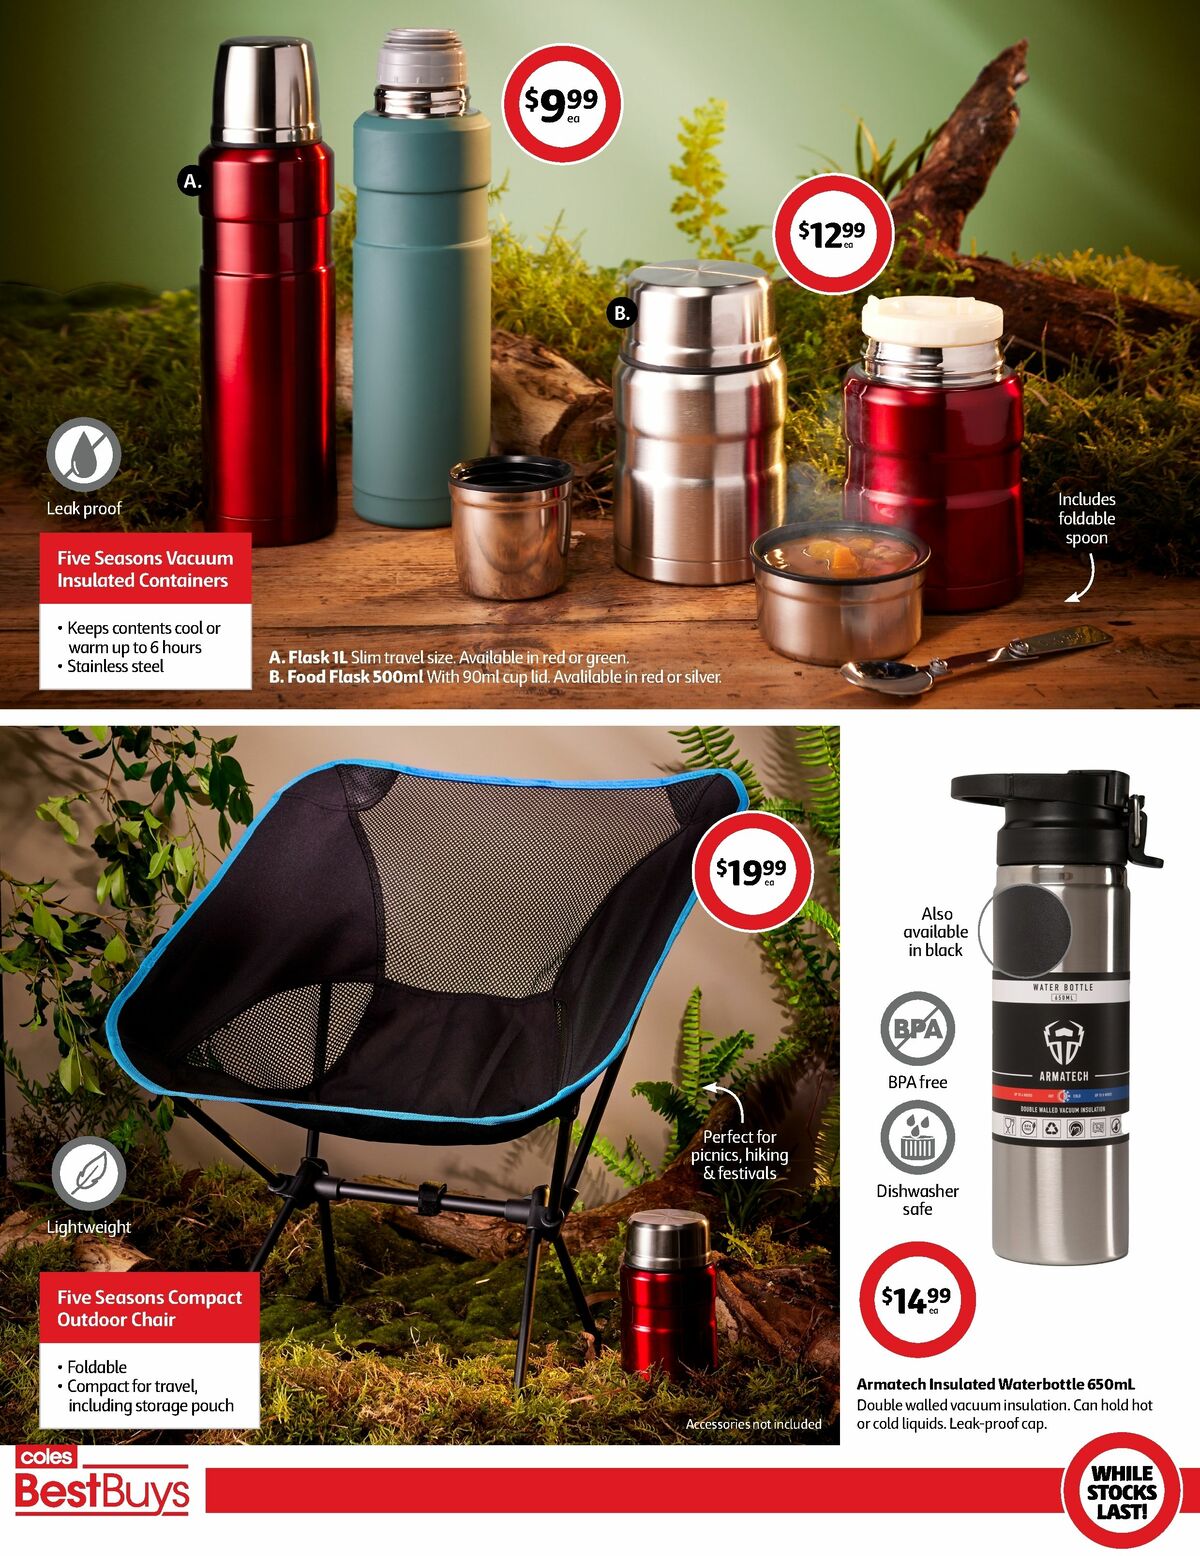 Coles Best Buys - Ultimate Outdoor Gear Catalogues from 28 June